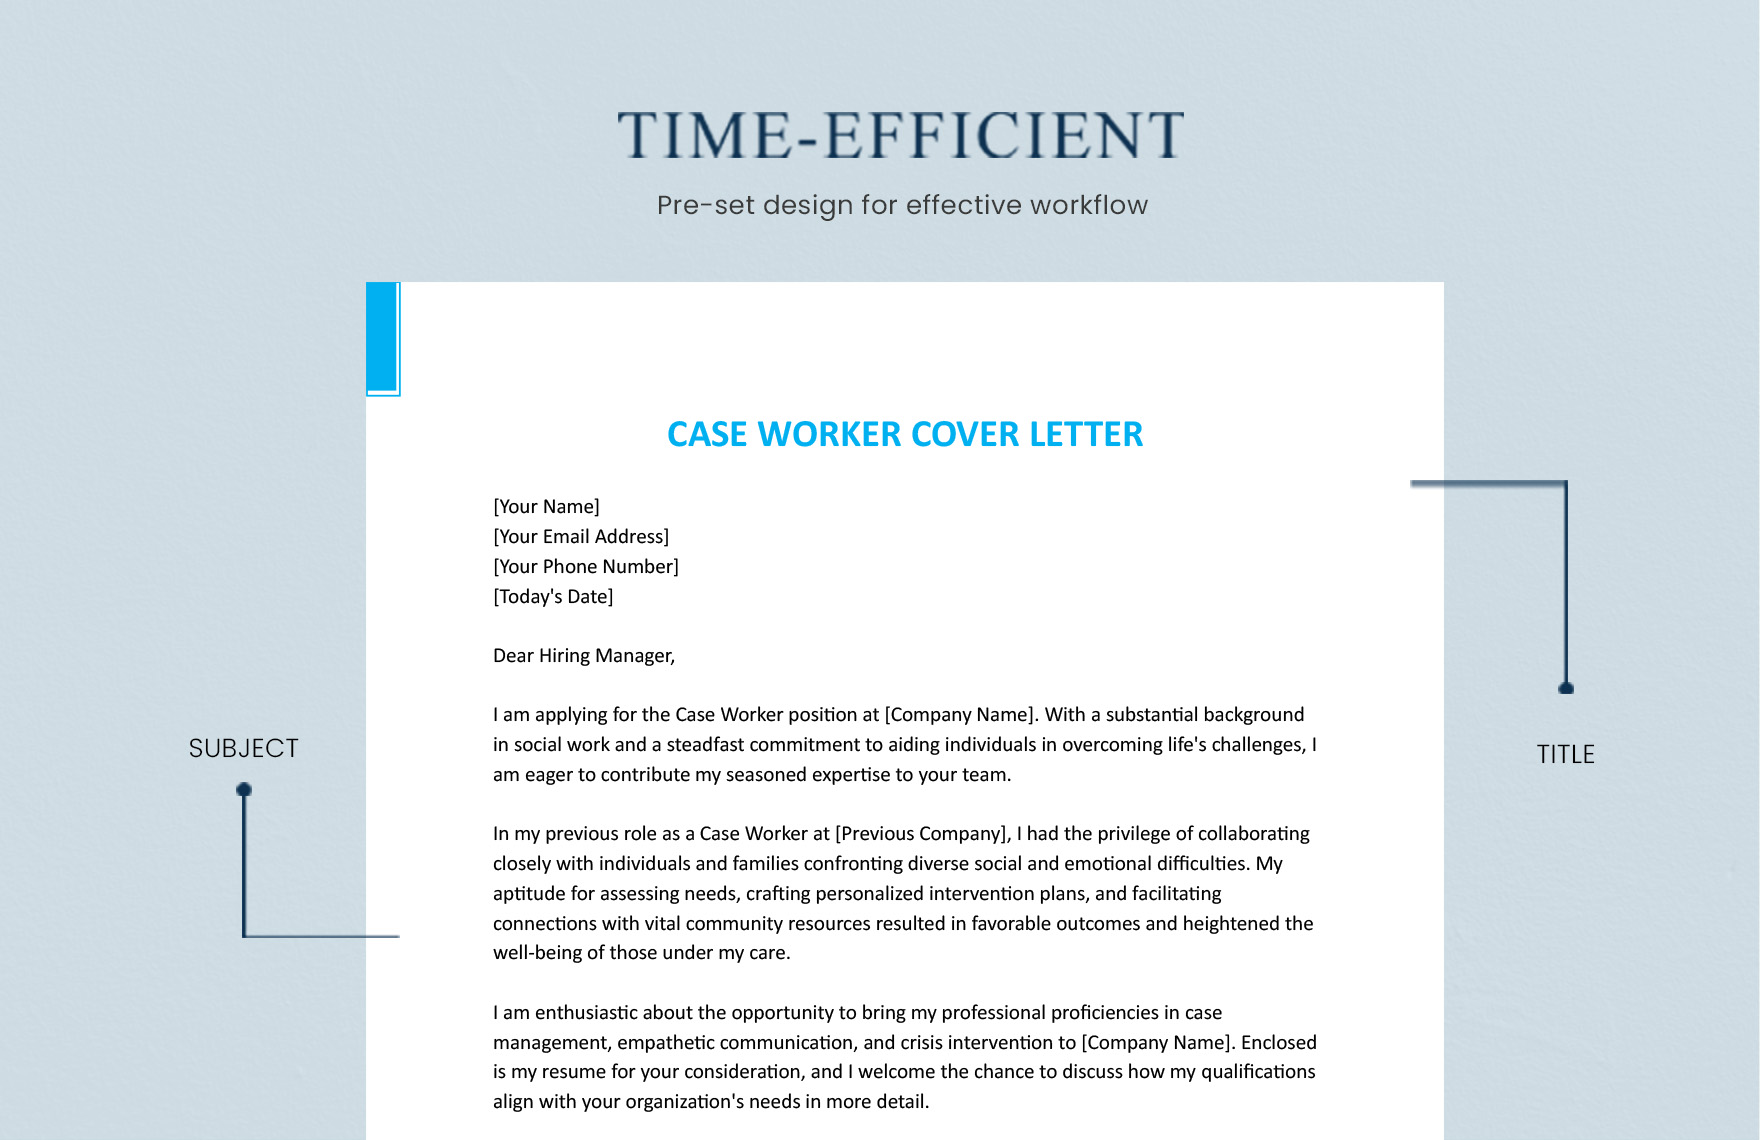 Case Worker Cover Letter